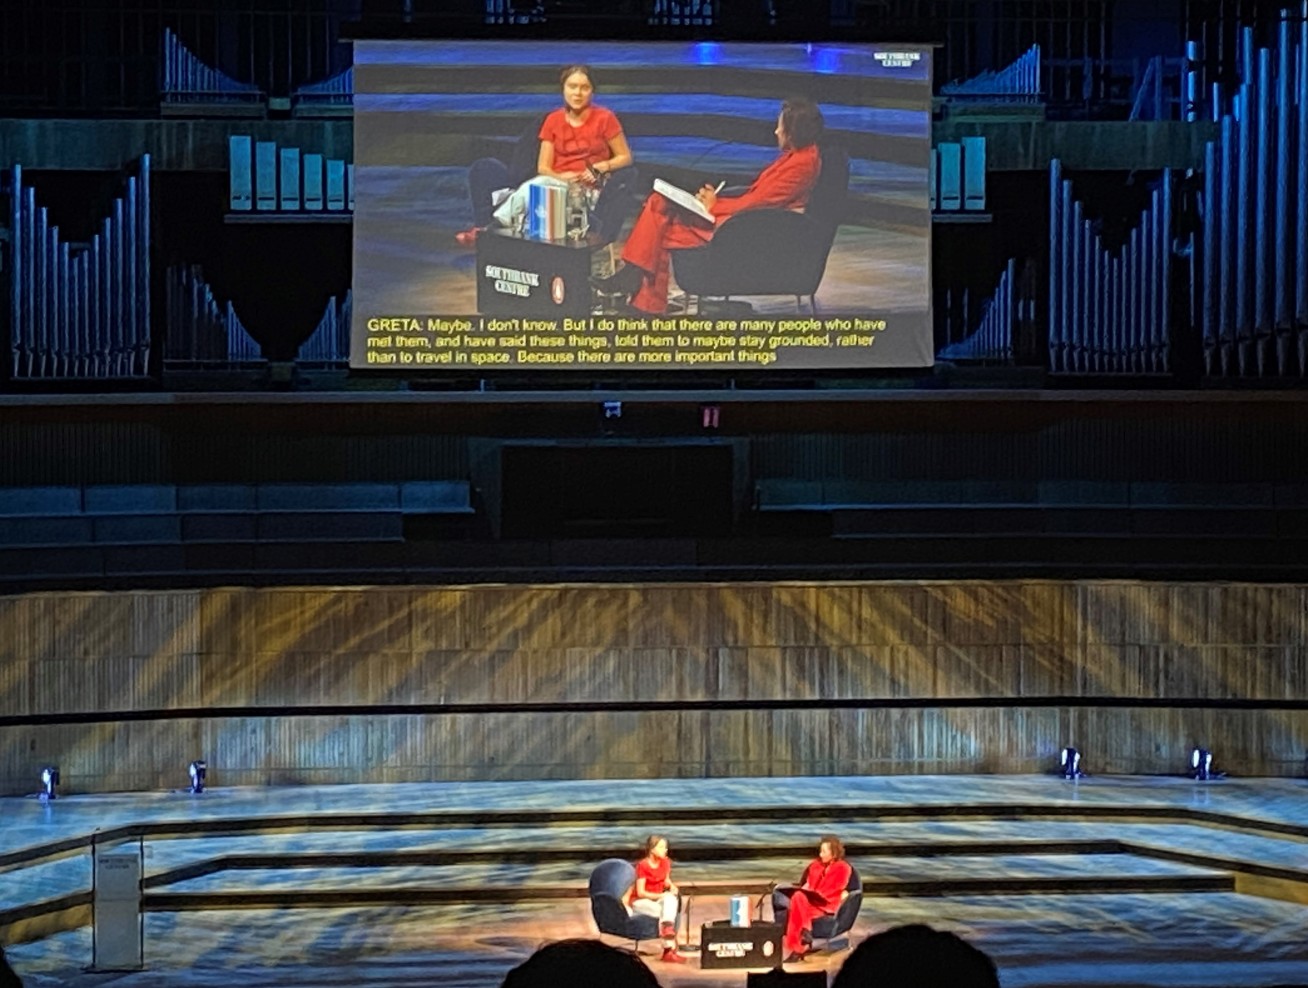 Greta Thunberg and another person sit on a stage with wood panelling, a large screen behind them relays a close-up video